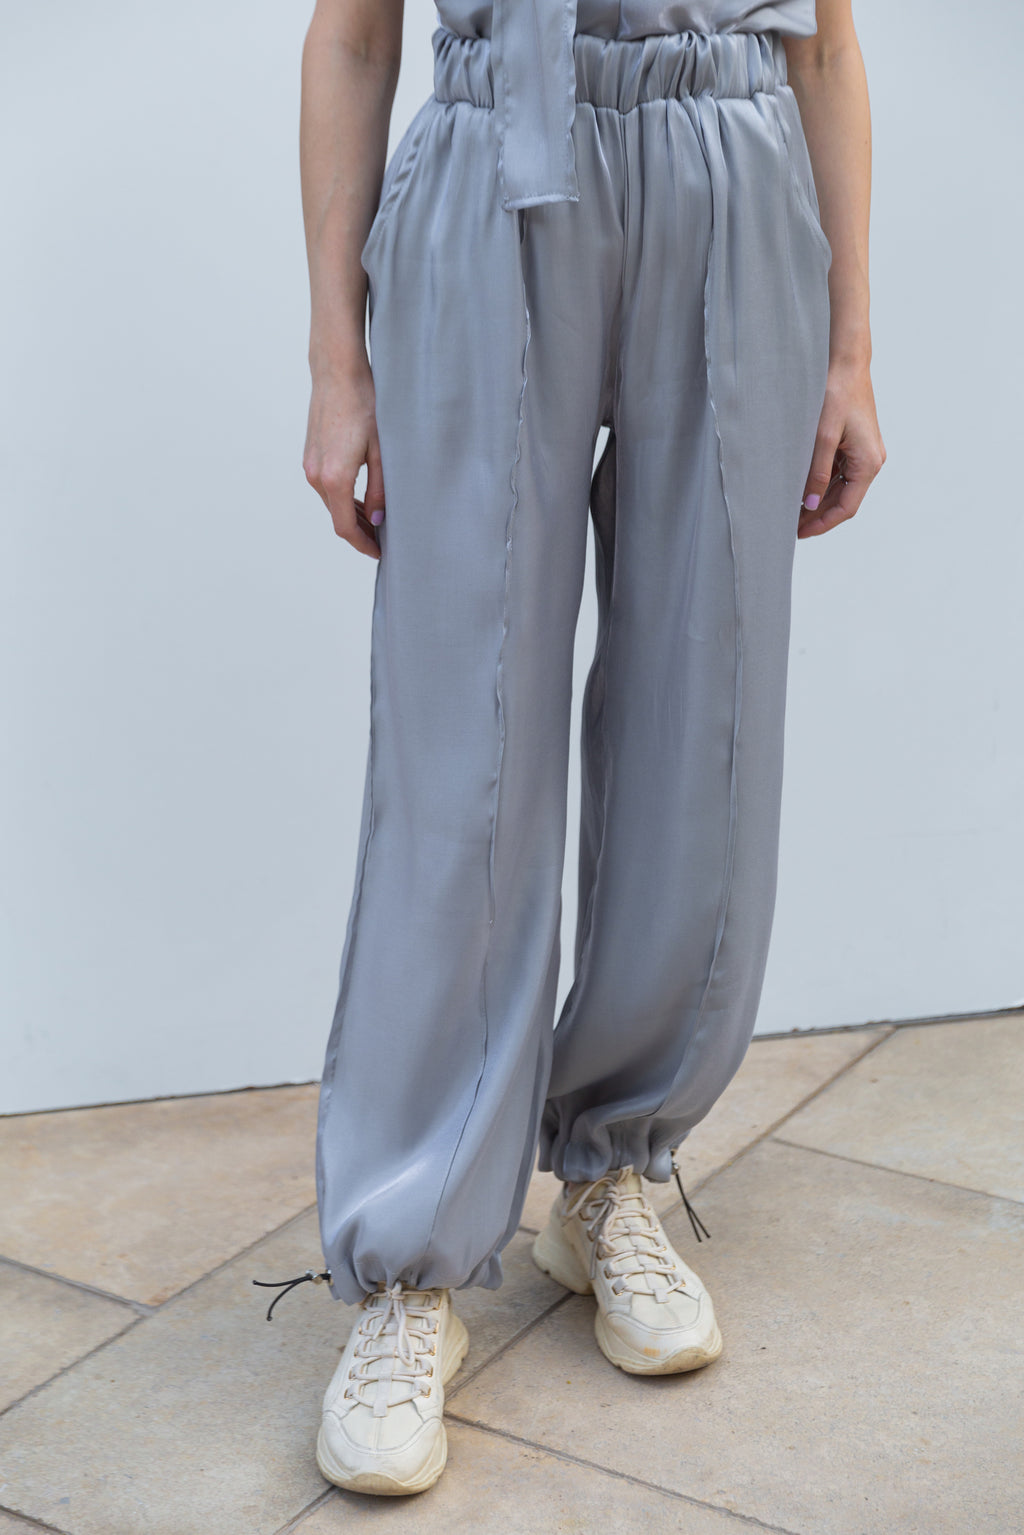 Shimmery pants in grey